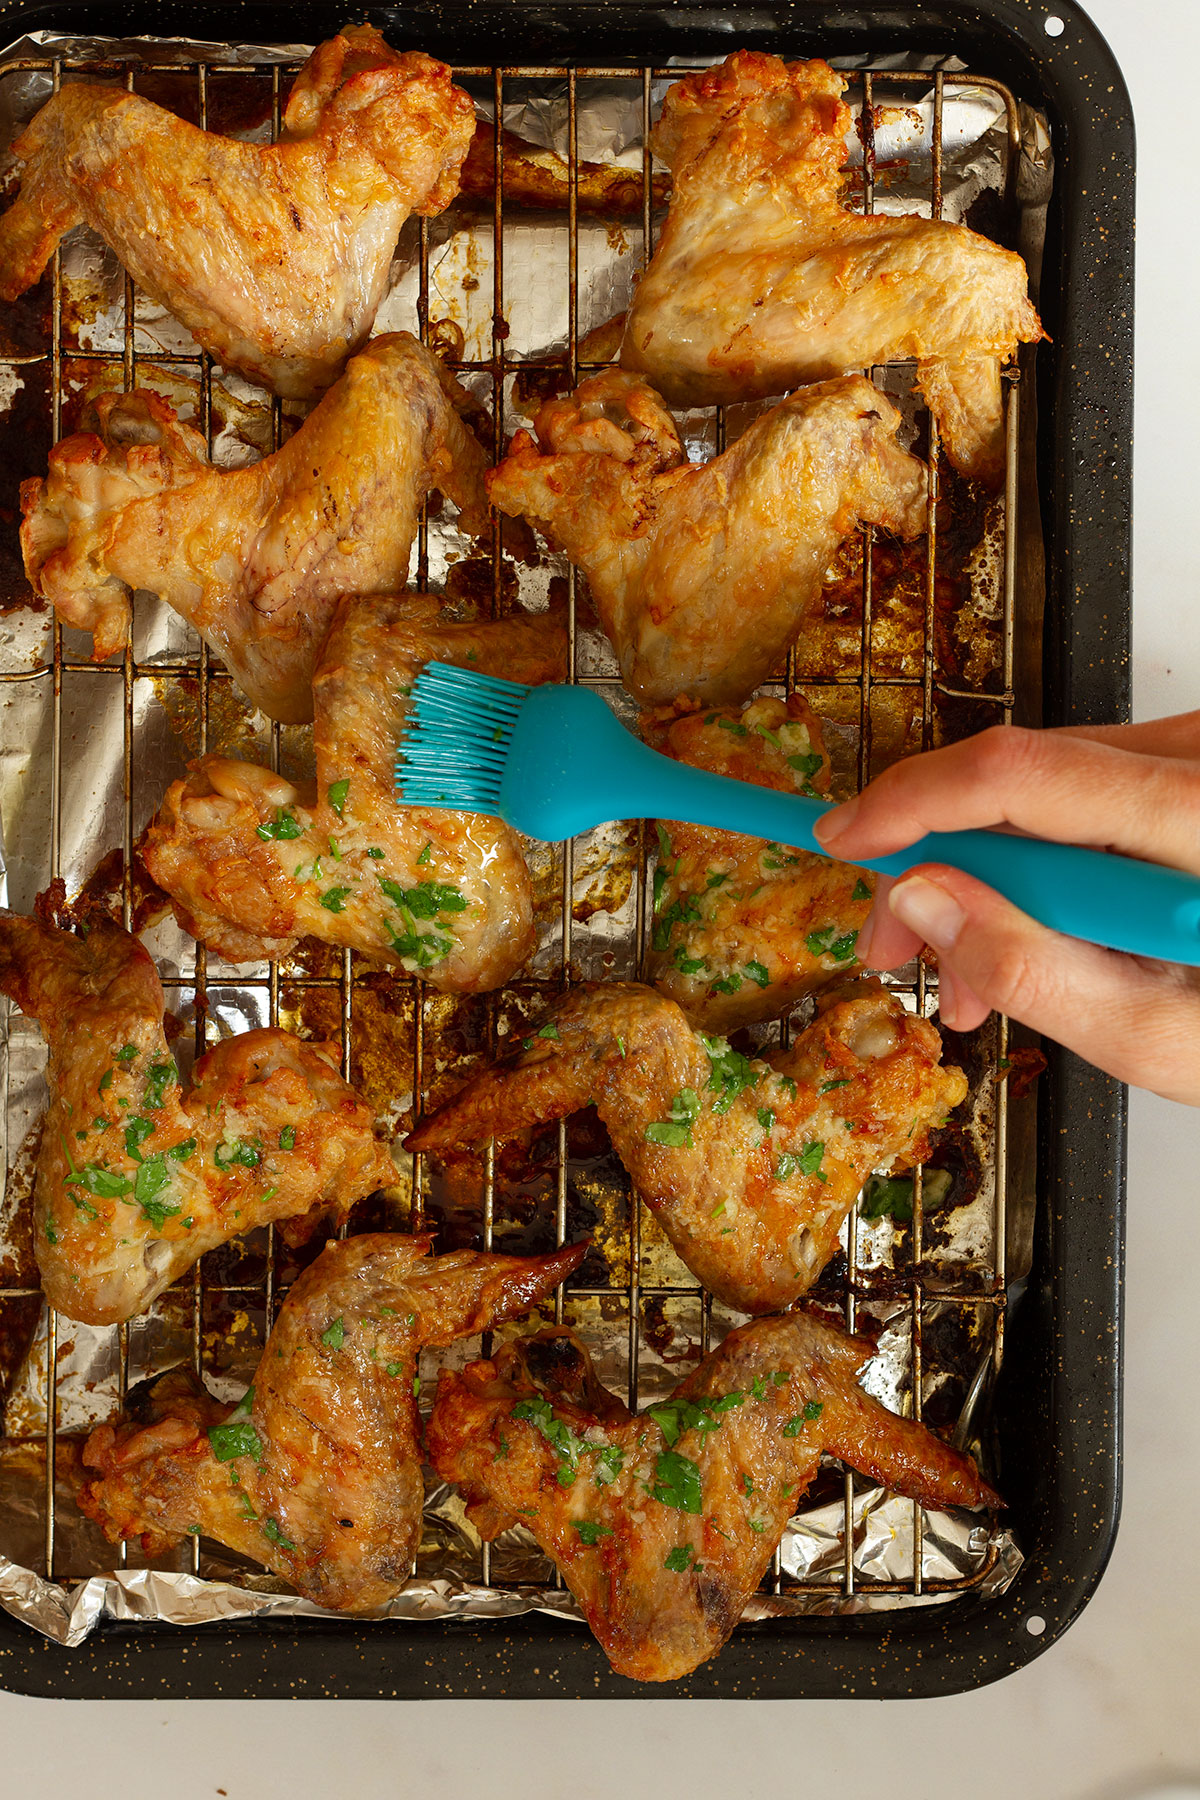 Brushing the cooked chicken wings with the garlic butter sauce using a blue silicone brush.